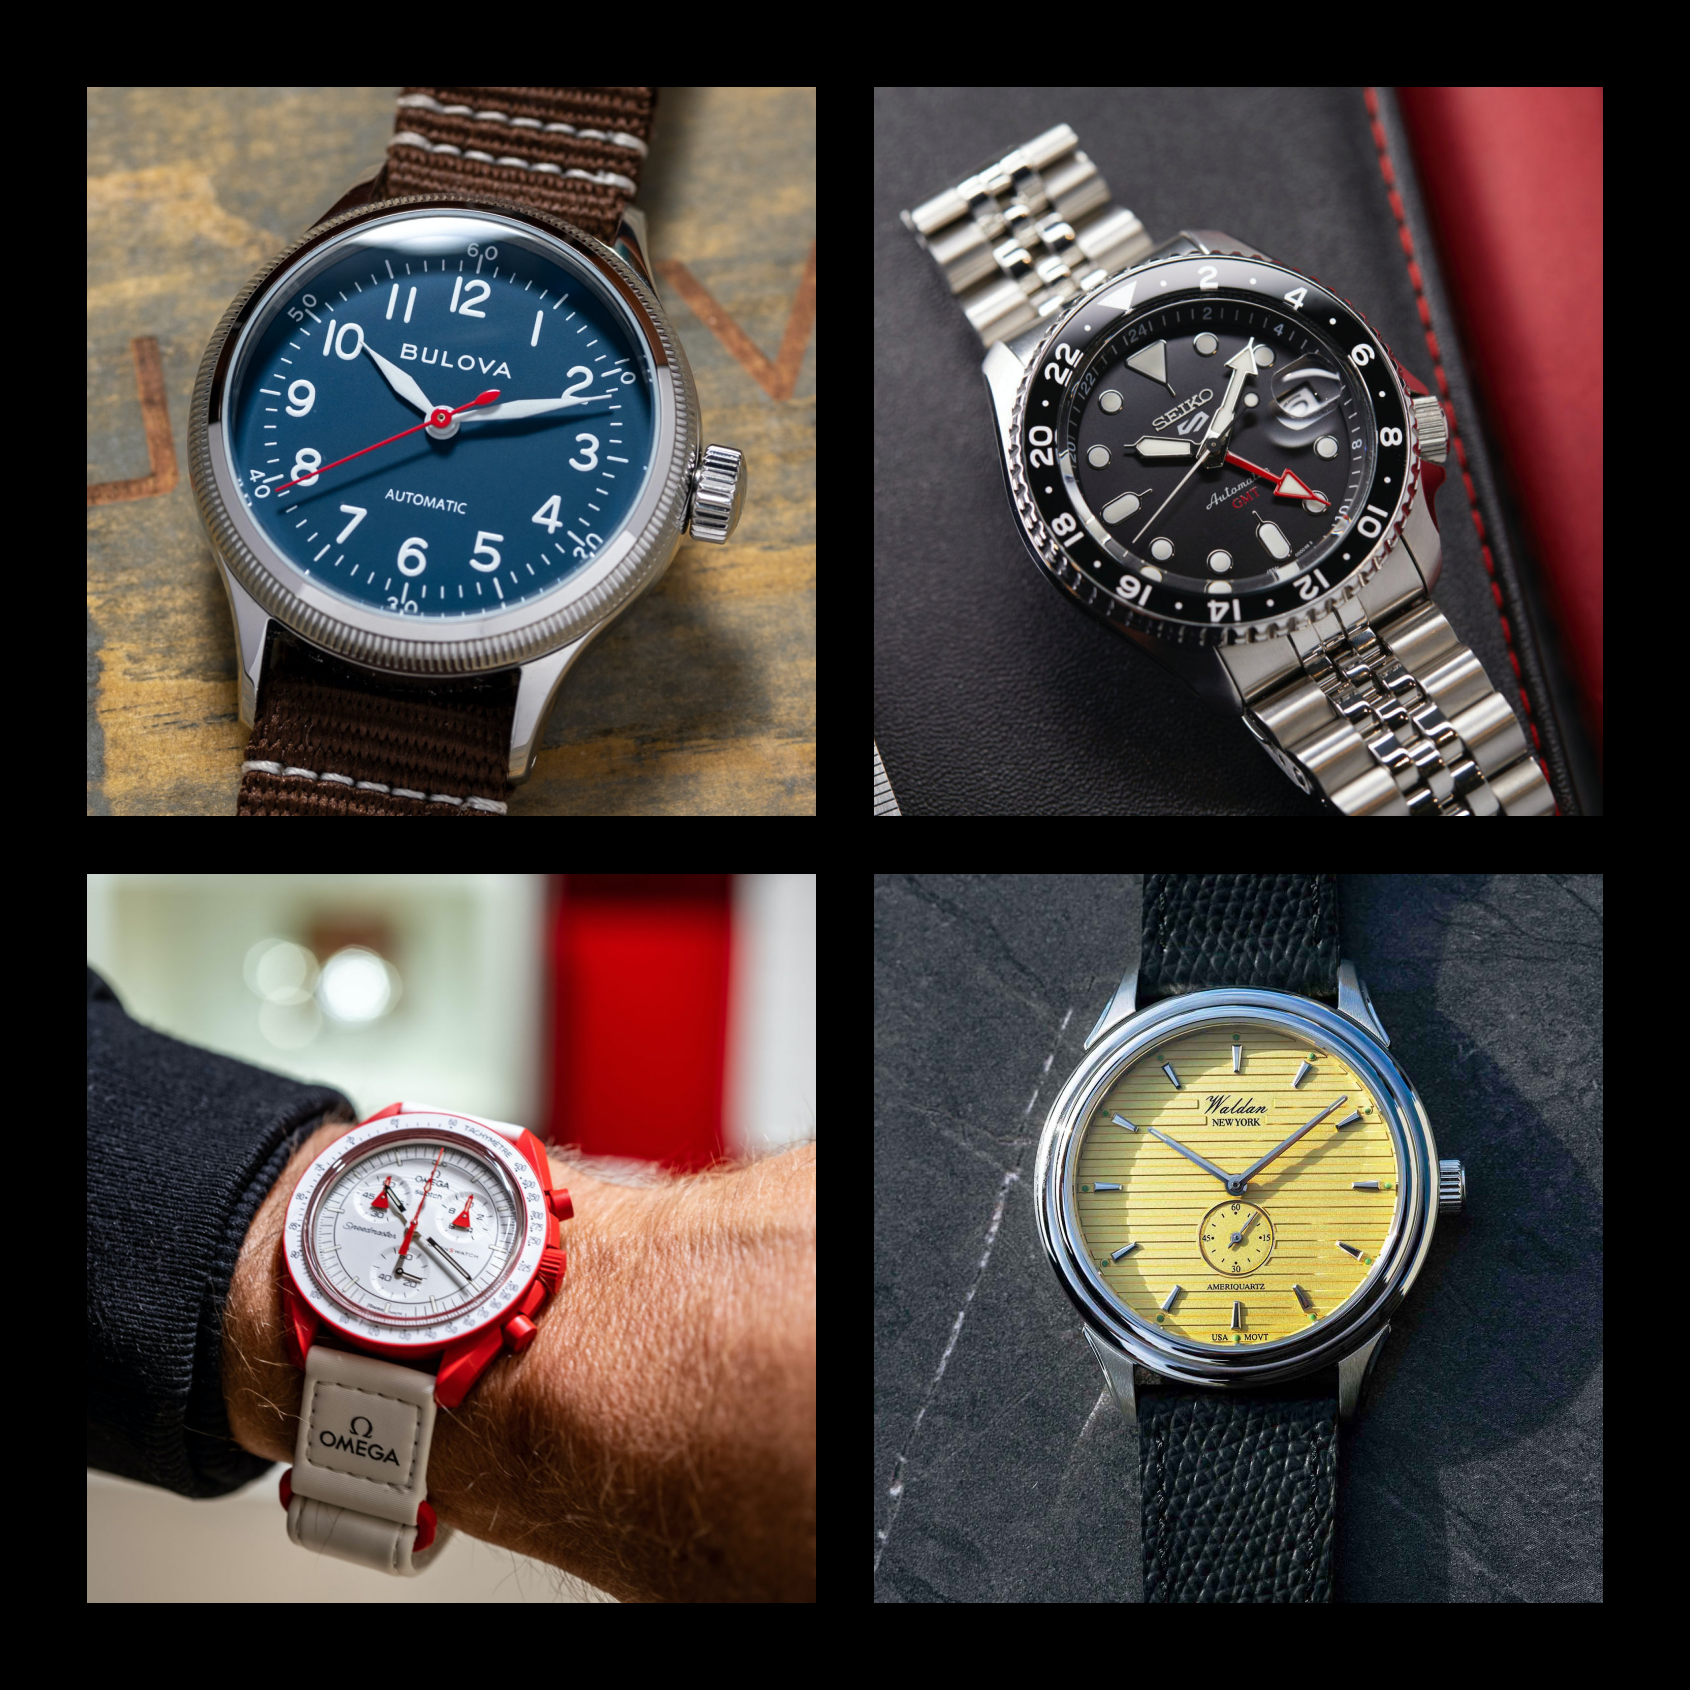 T+T Holiday Picks: By popular demand – the best watches to gift under $500 (2022 Edition)